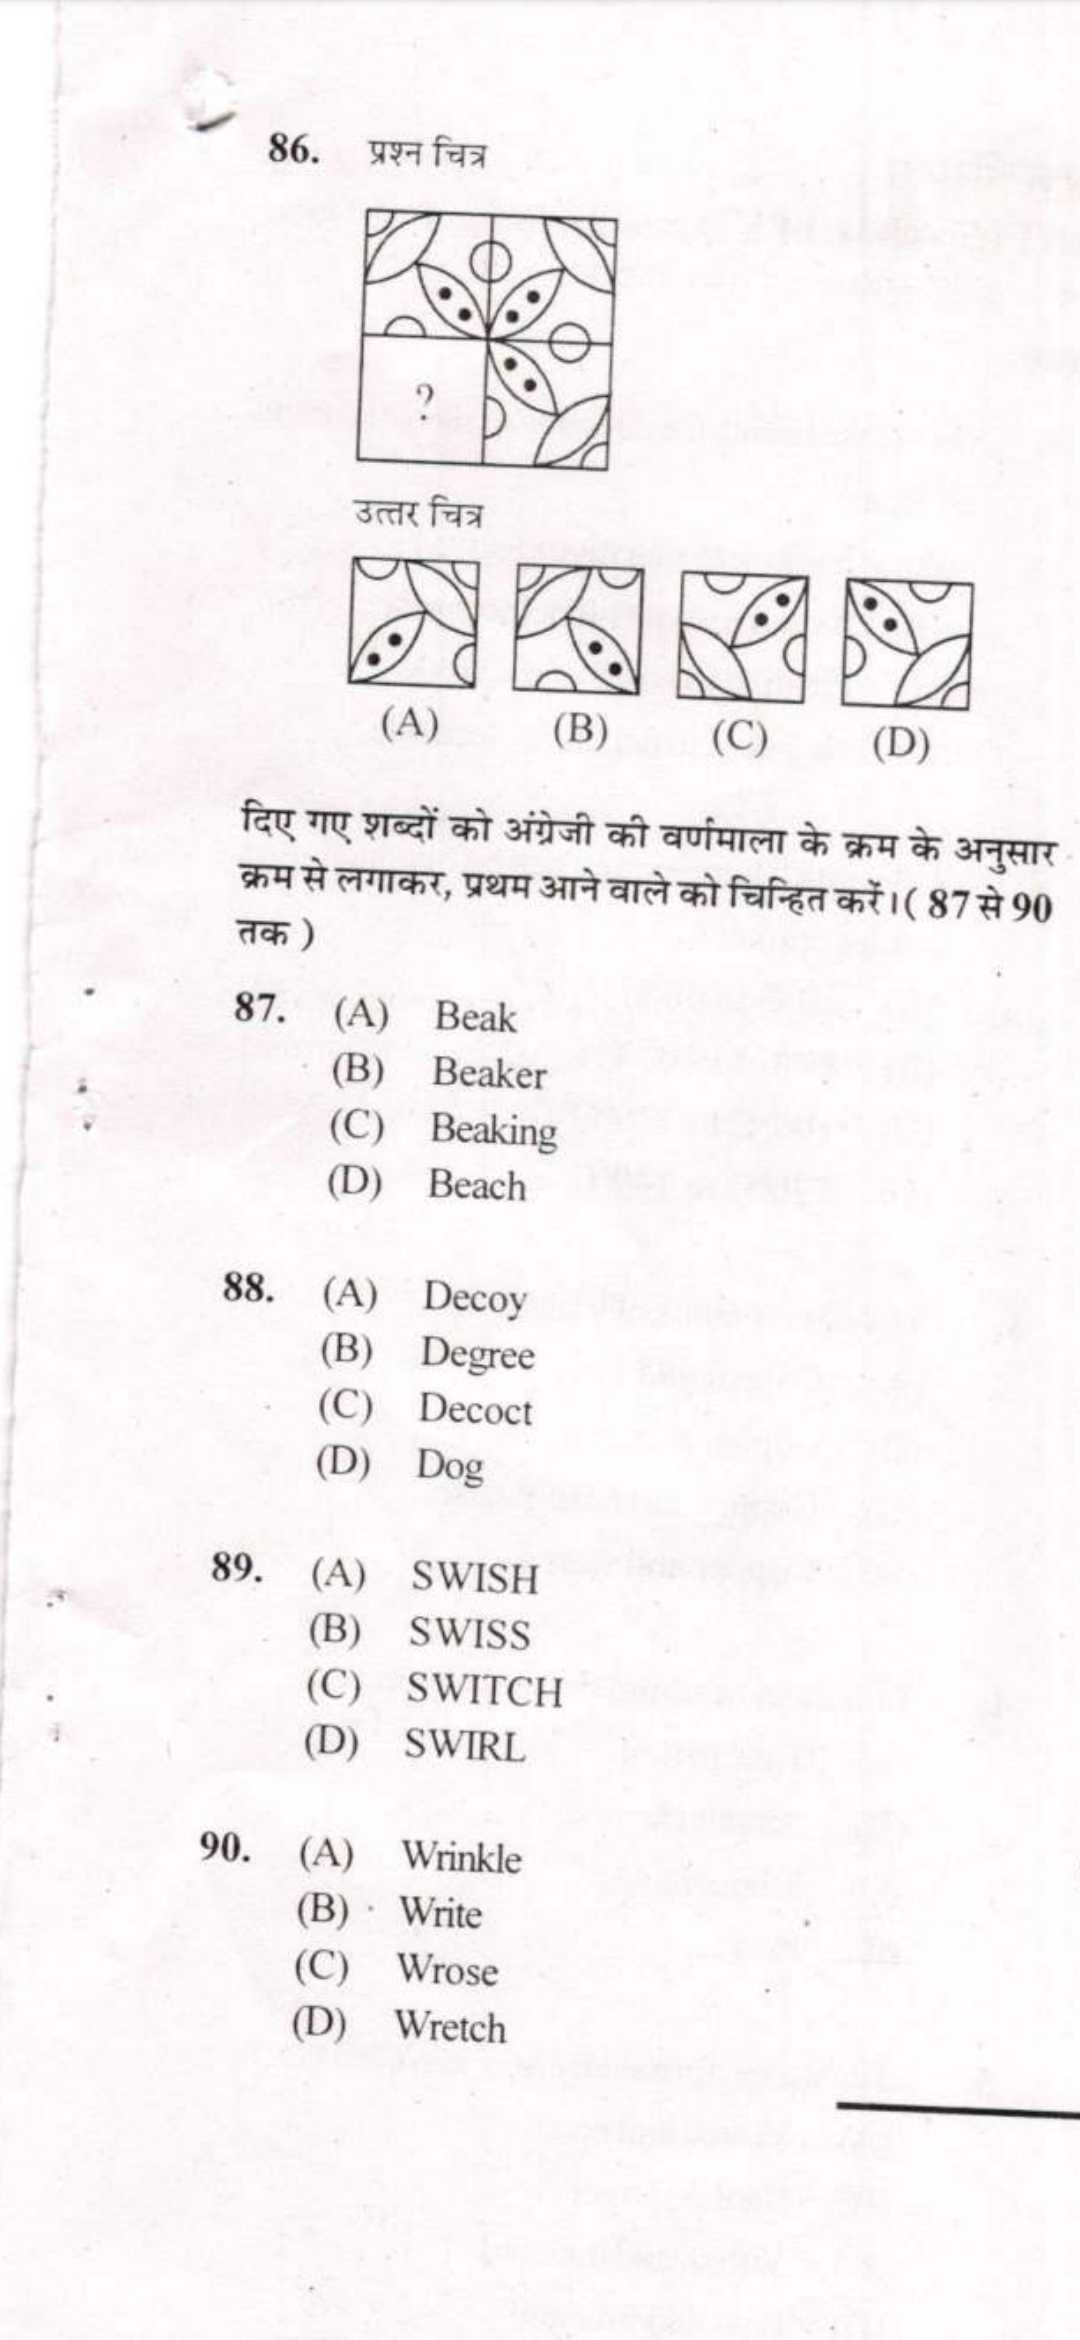 Reasoning questions 86 to 90